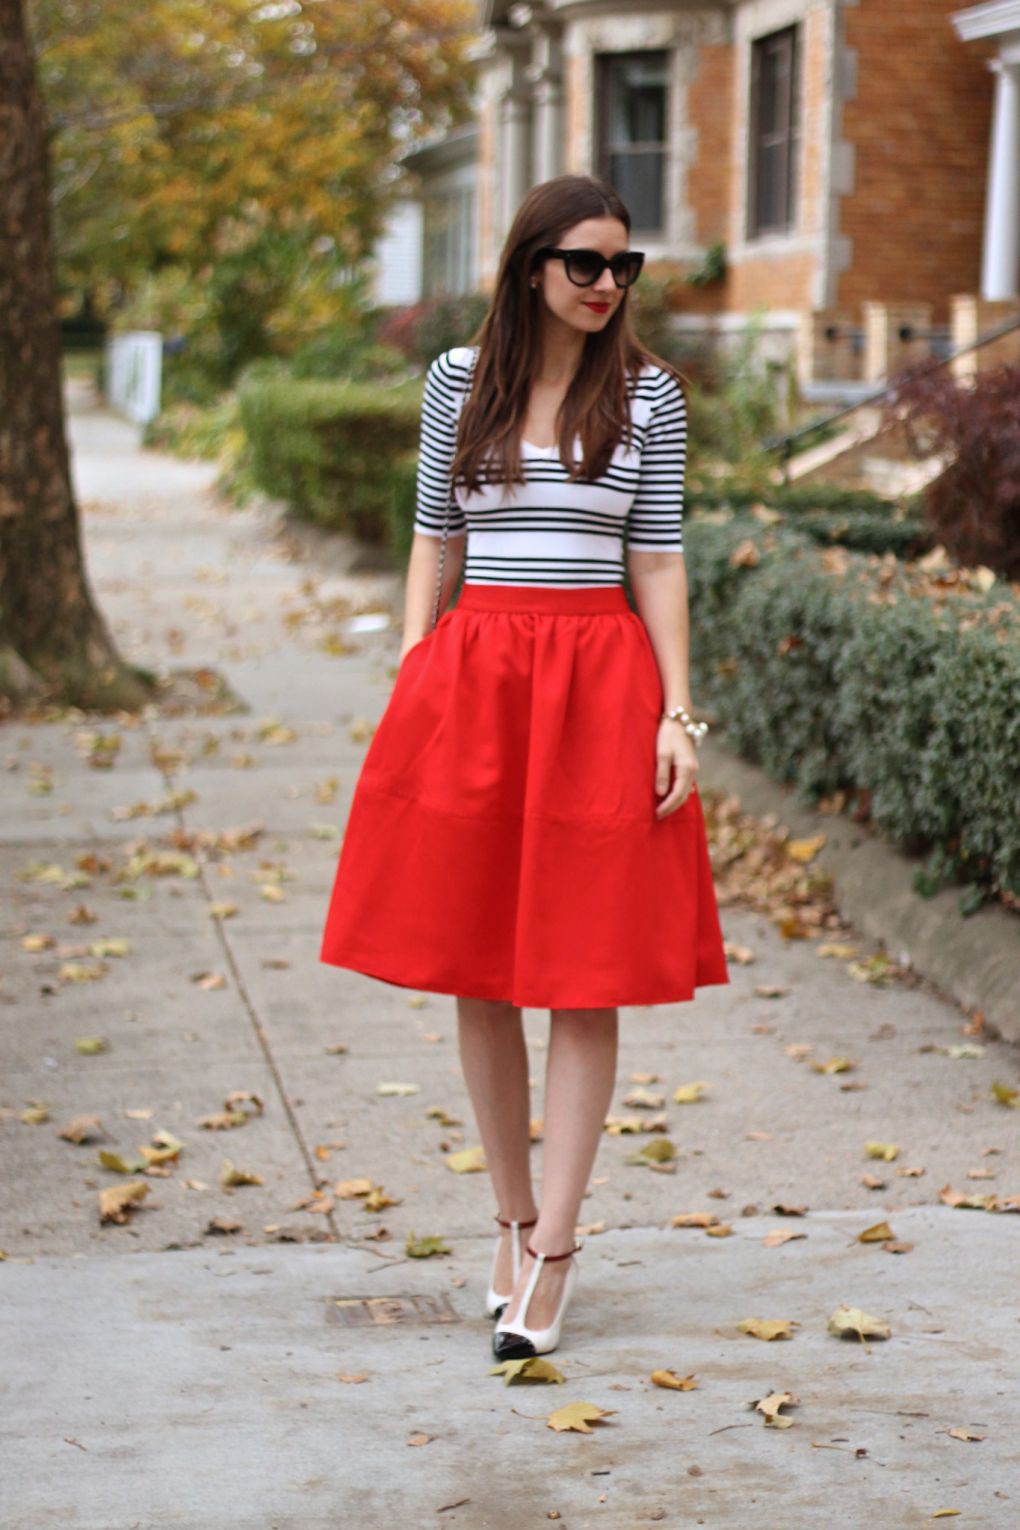 Full skirt striped top, High-heeled shoe | Red Skirt Outfit | High ...